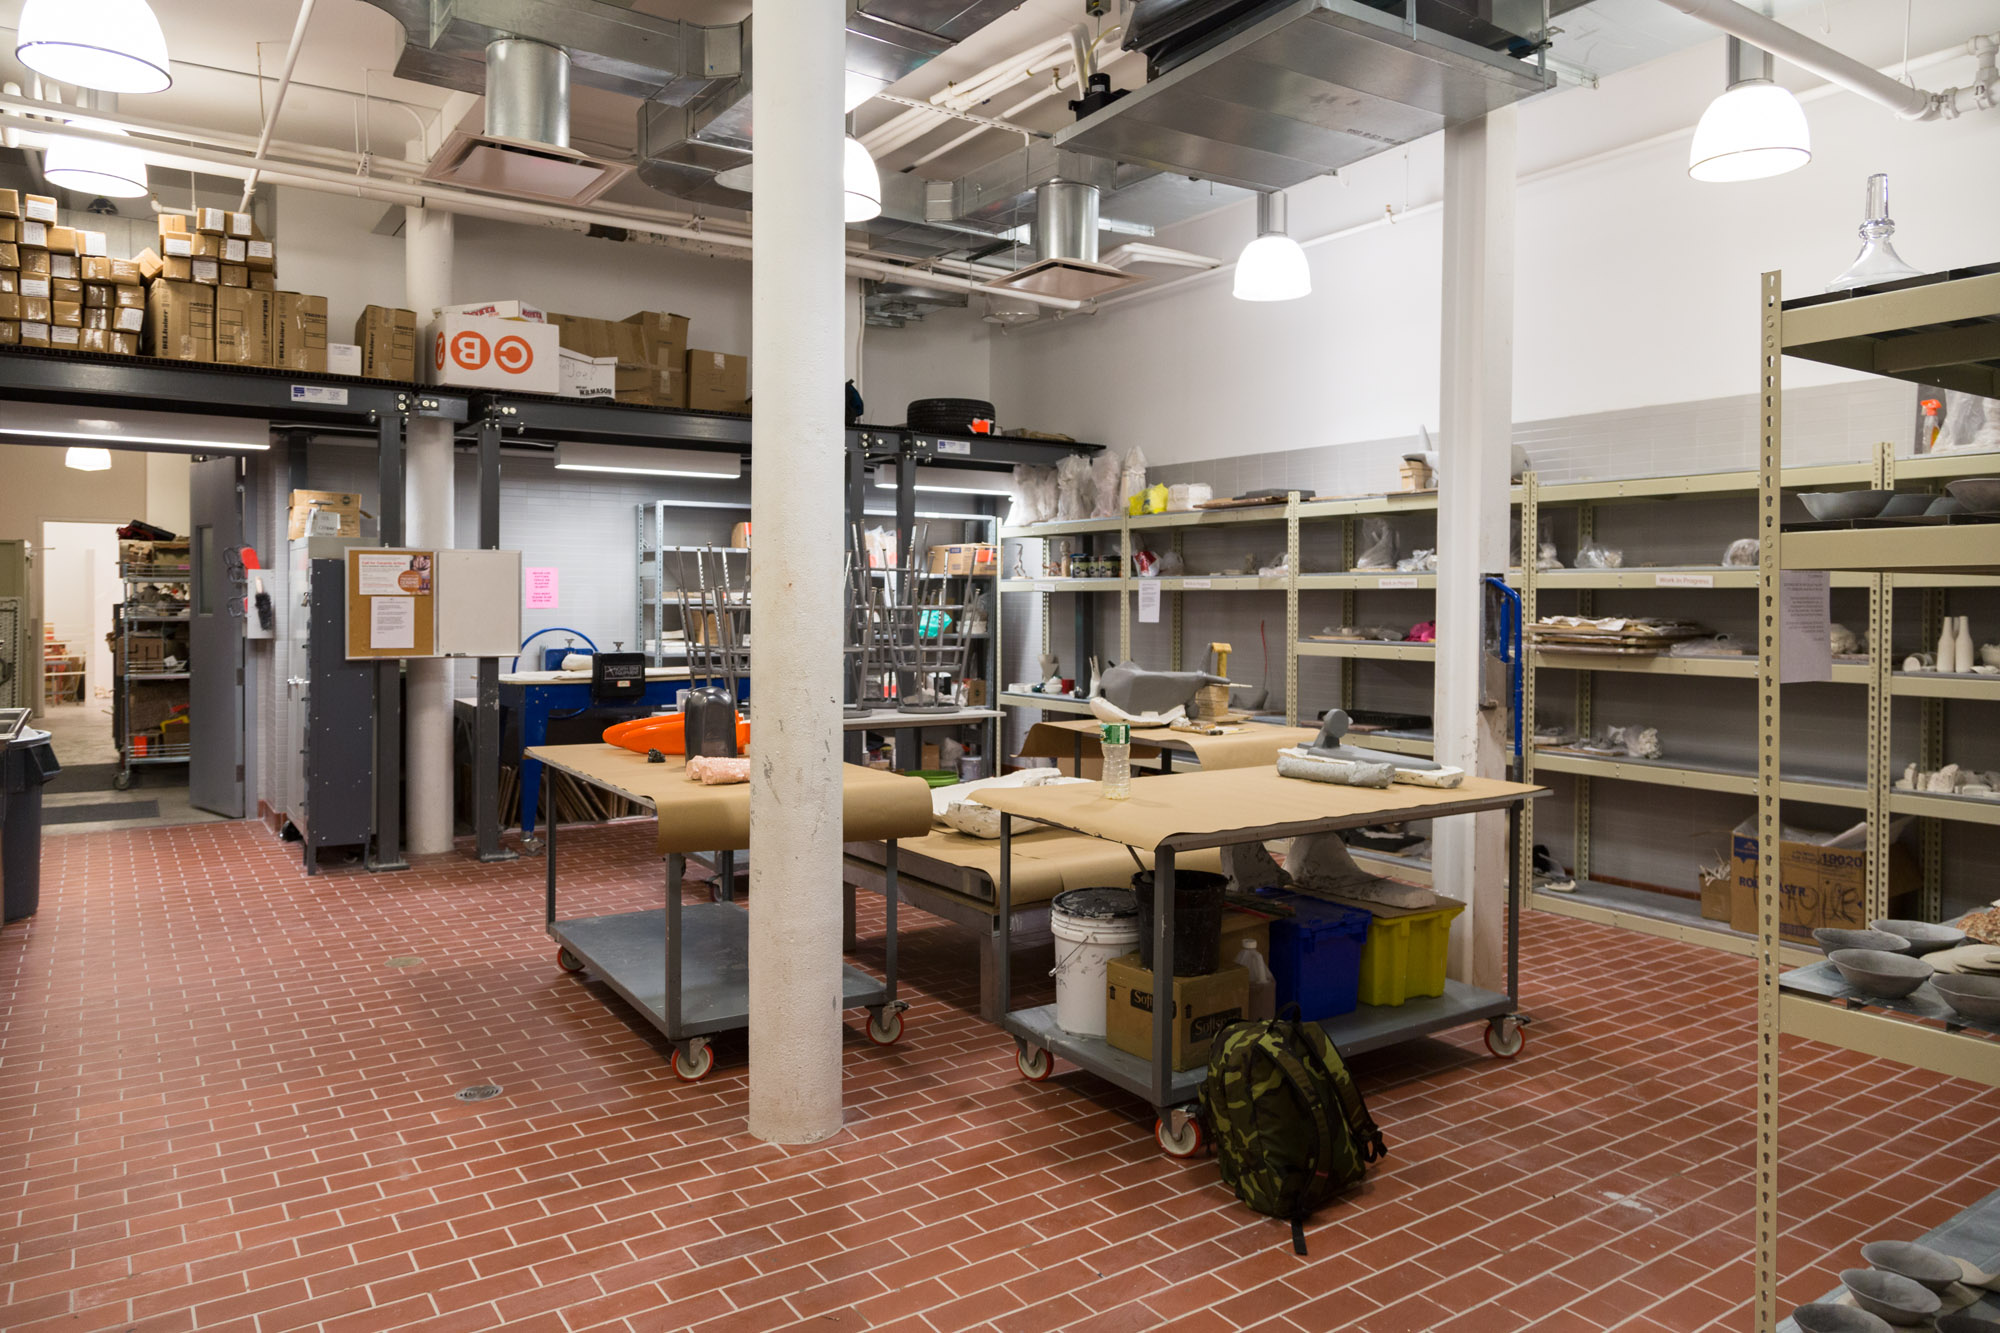 The ceramics workshop with large tables and shelves.